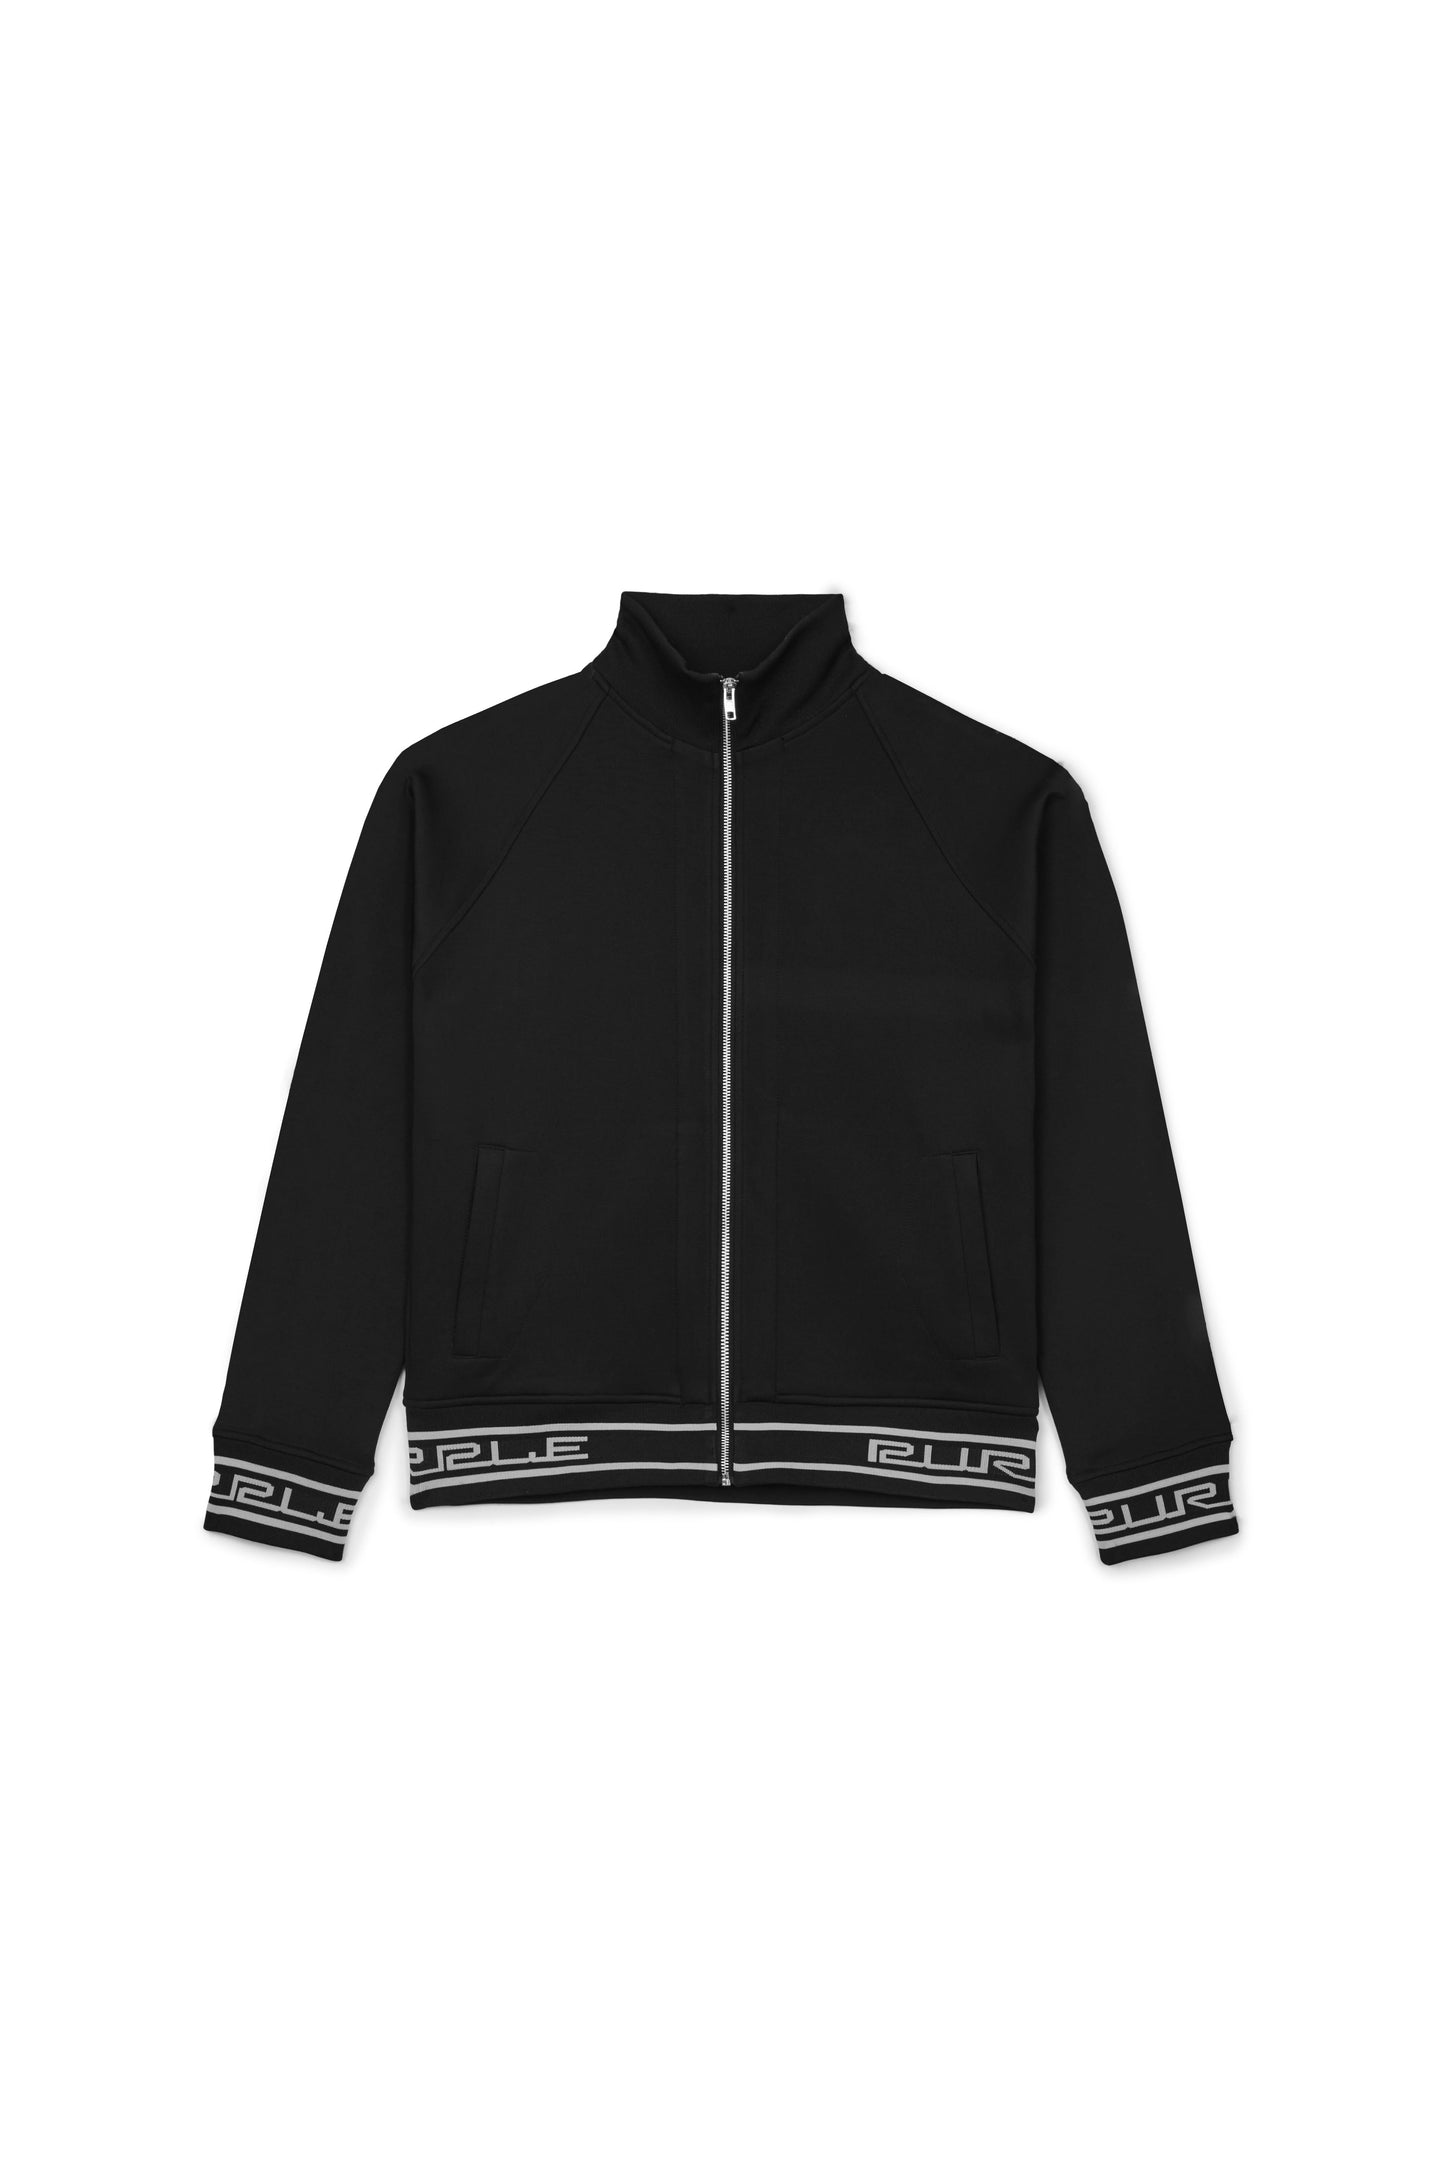 P414 TRACK JACKET - Solid Poly Tricot Black Track Jacket